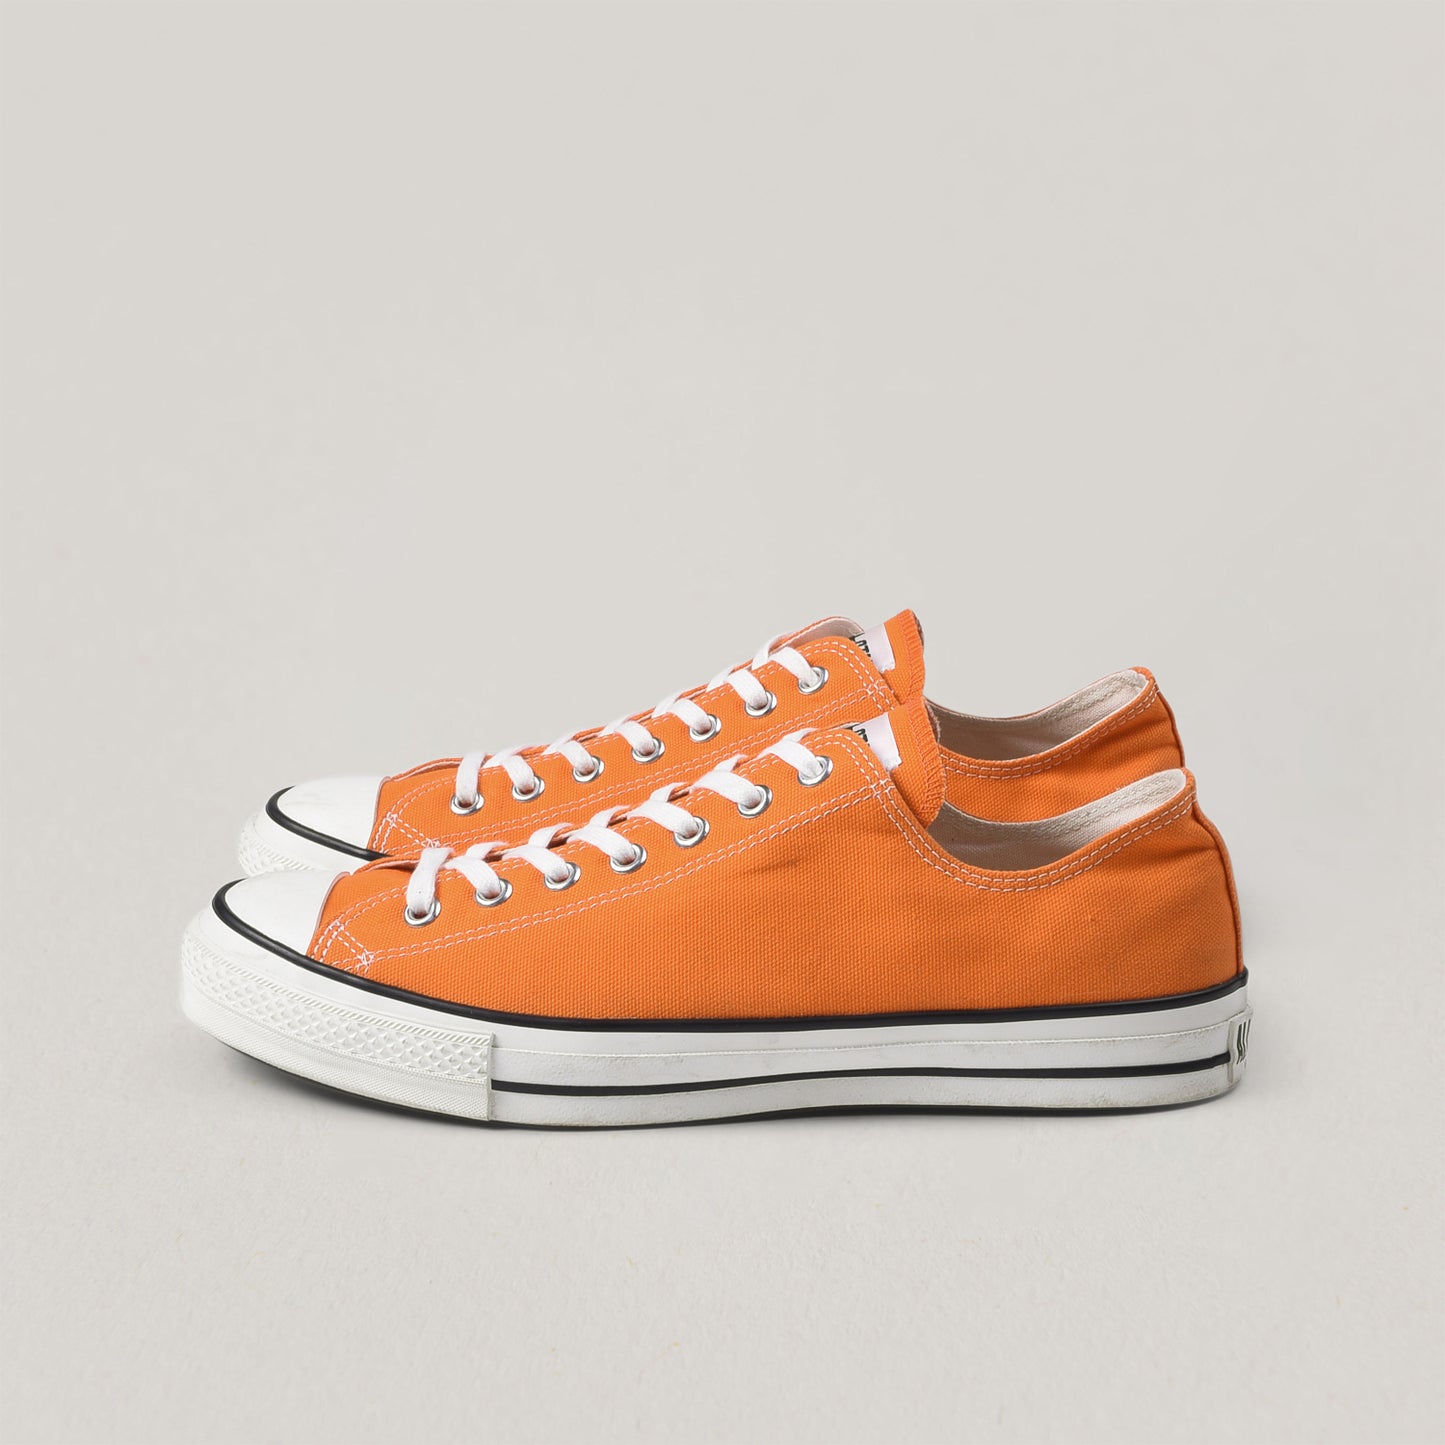 USED CONVERSE ALLSTAR MADE IN JAPAN OX LOW - ORANGE